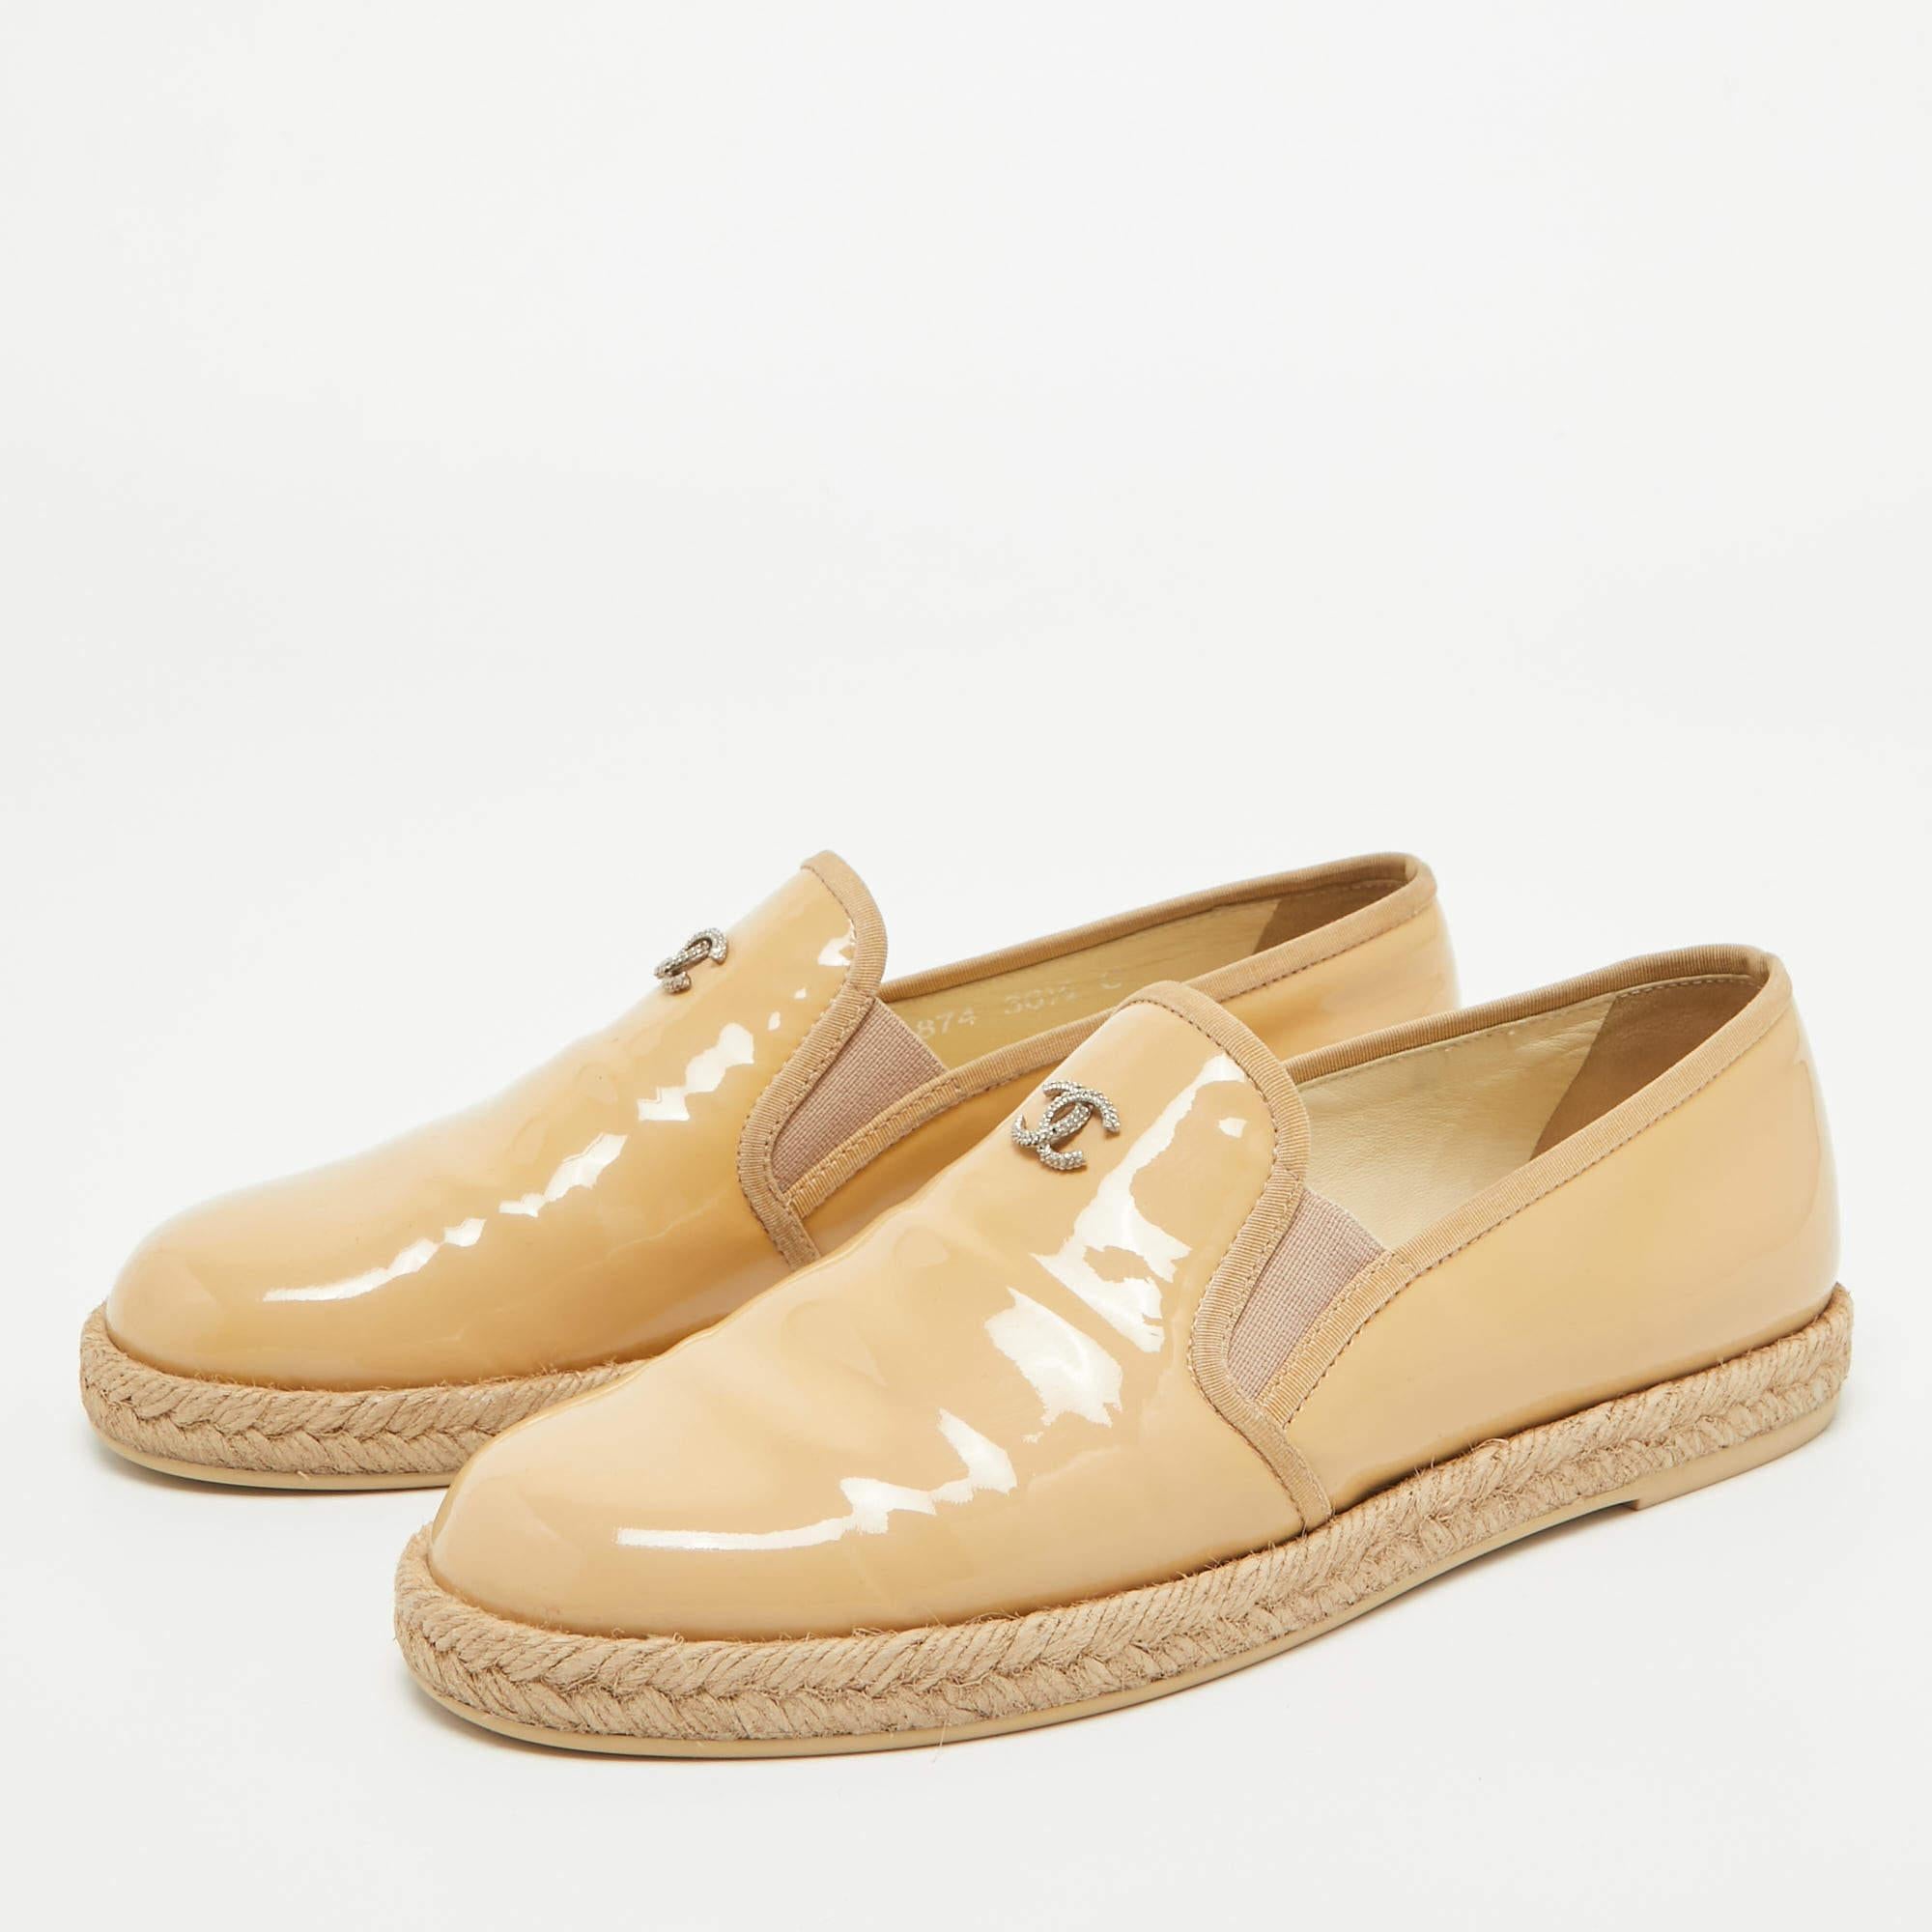 Chanel Beige Patent Leather CC Espadrille Loafers Size 36.5 2